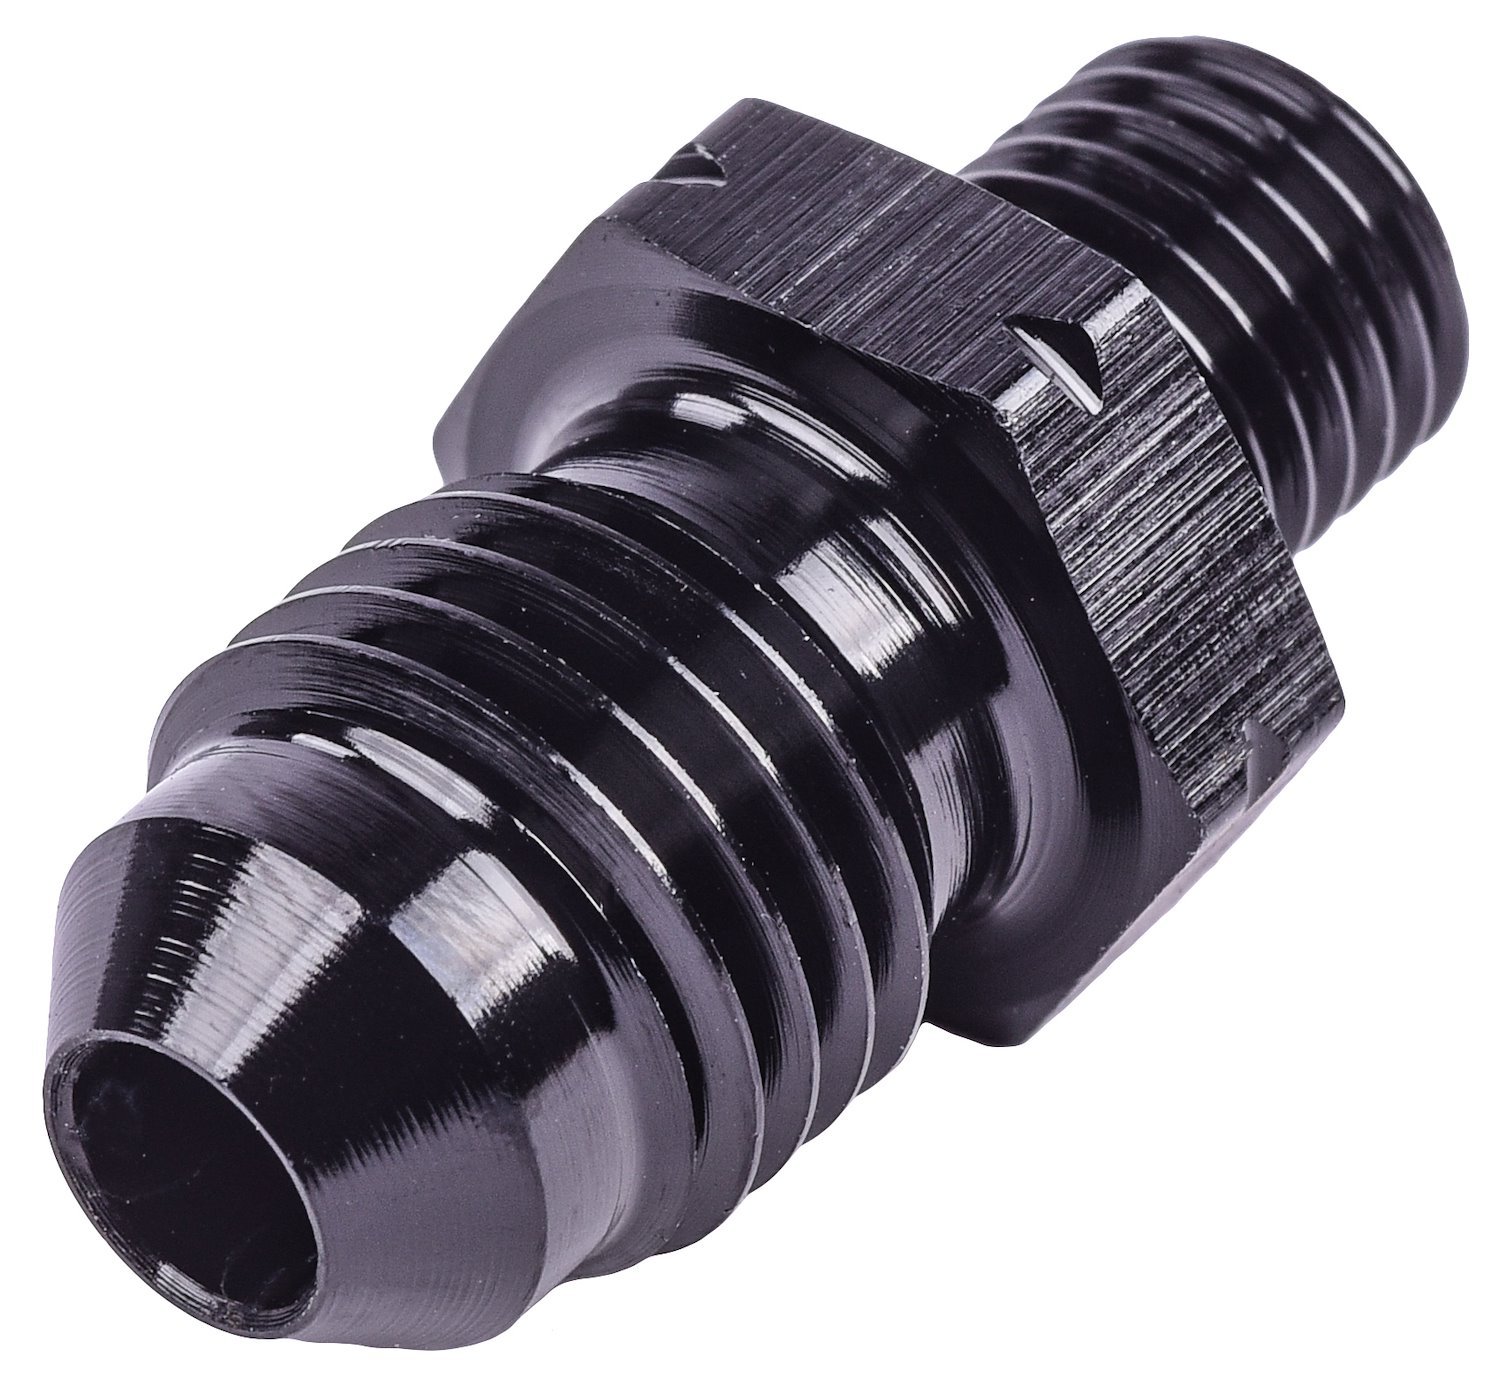 JEGS 101300: AN to Metric Adapter Fitting, -4 AN Male to 8mm x 1 Male, Straight AN Flare to Metric Thread, Aluminum, Black Anodized Finish, Washer Not Included